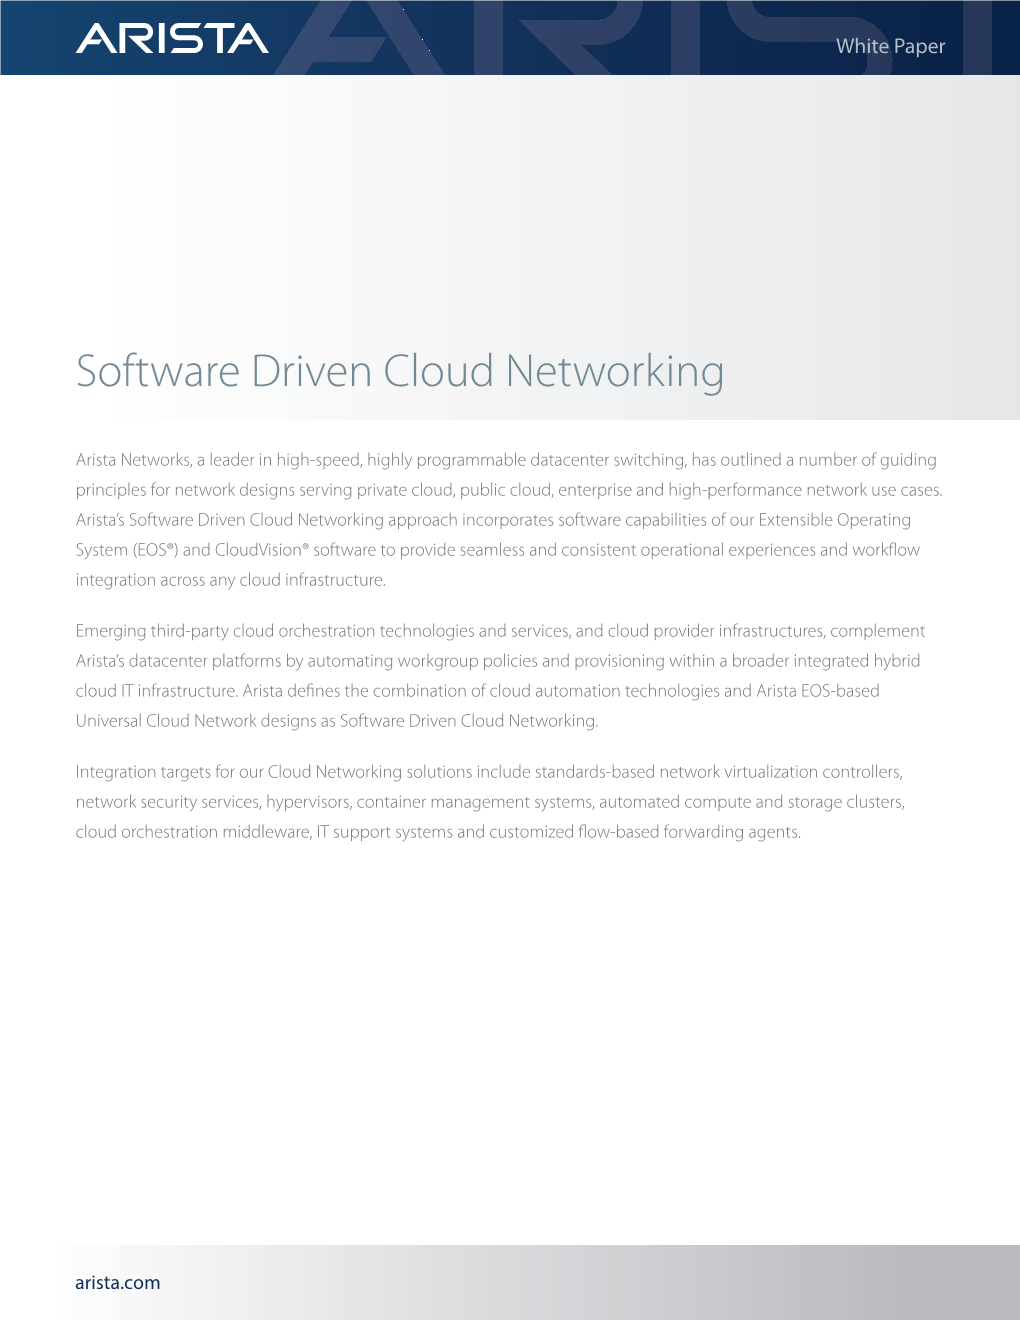 Software Driven Cloud Networking